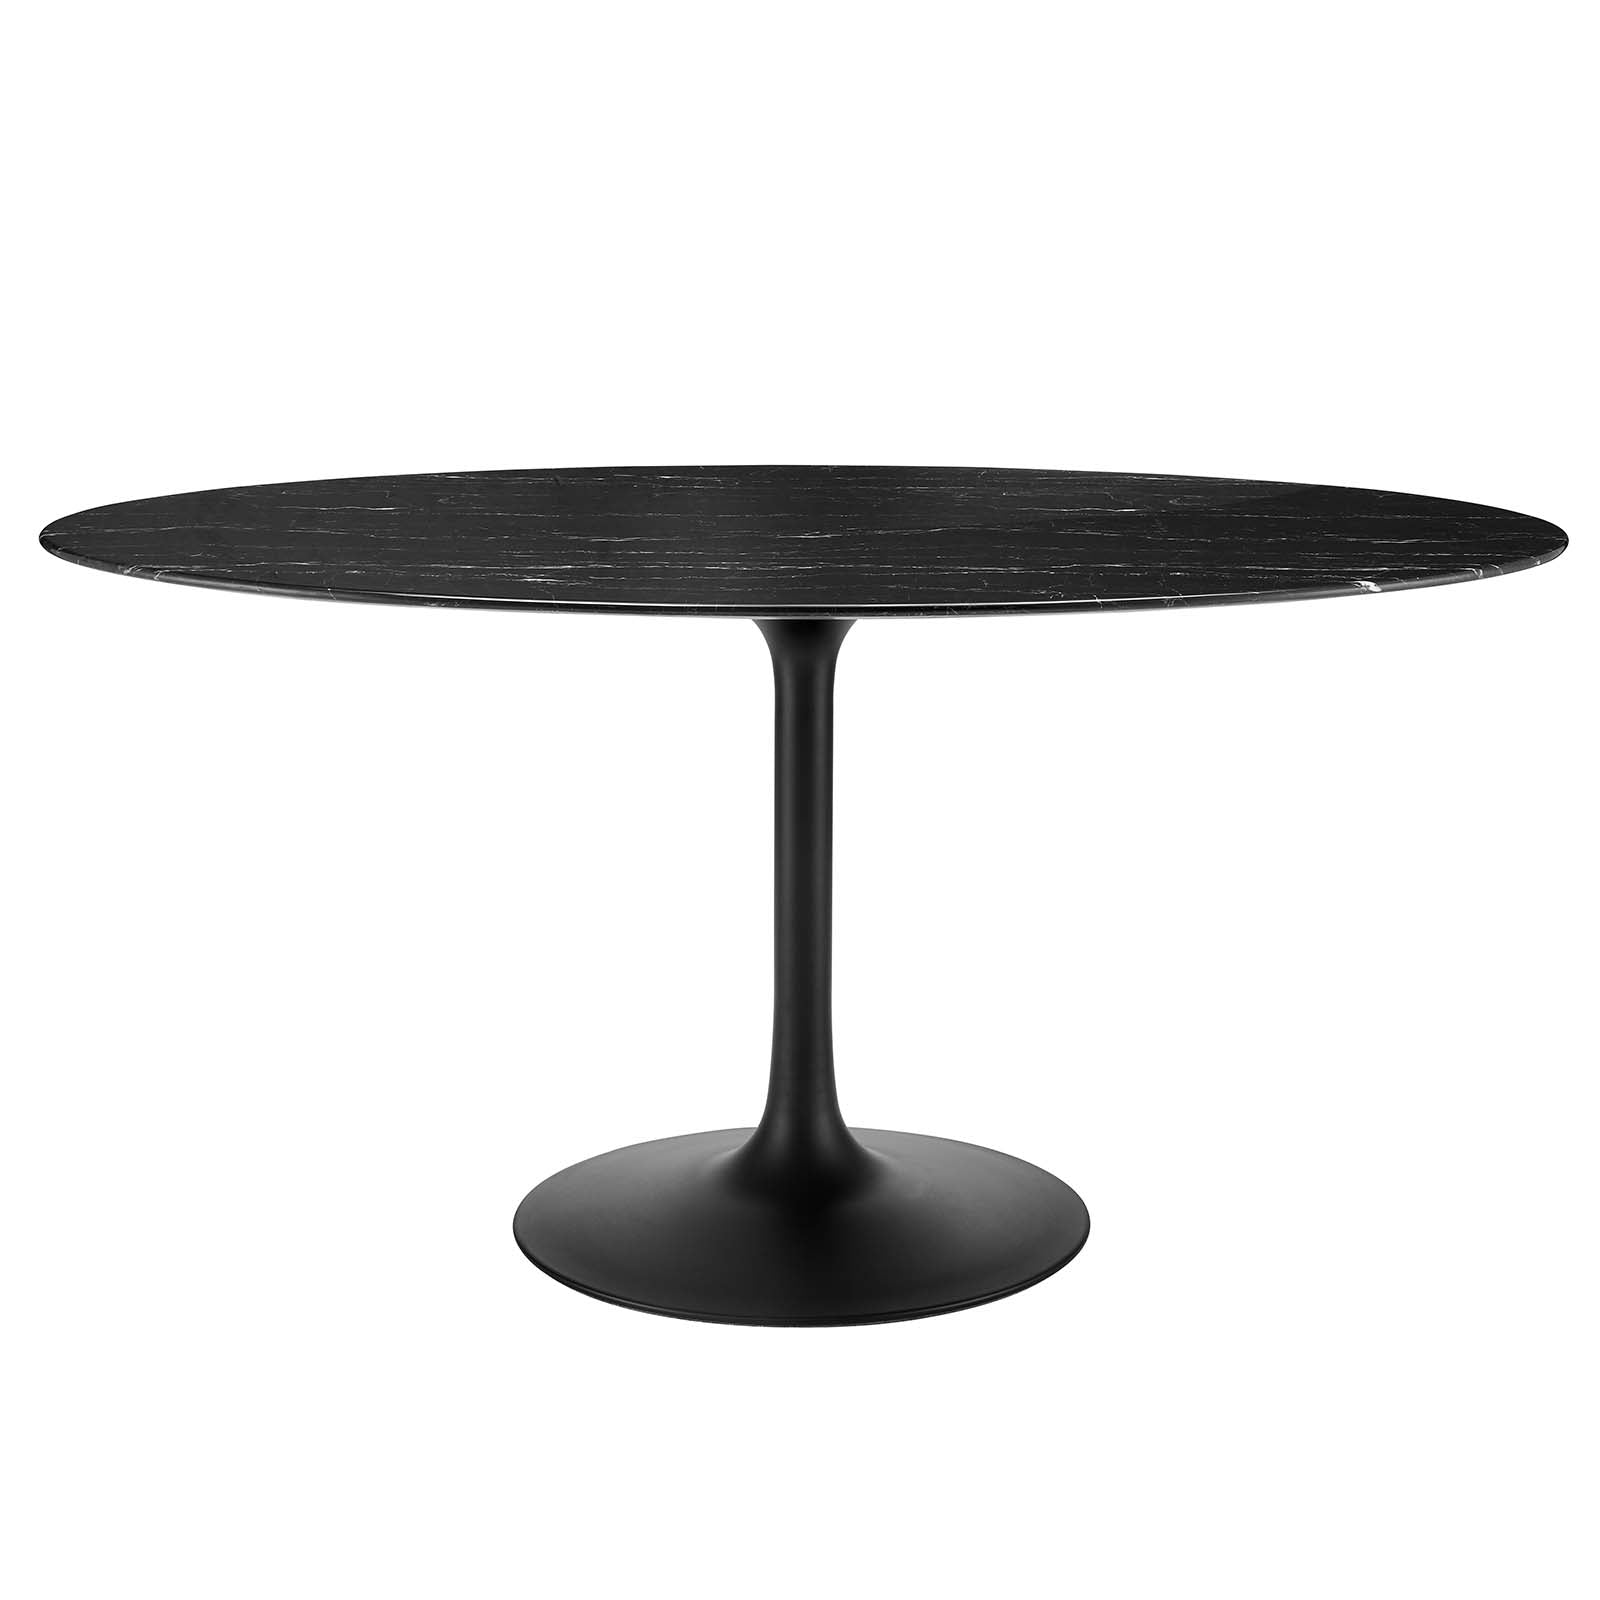 Modway Dining Tables - Lippa 60" Artificial Marble Oval Dining Table Black Black